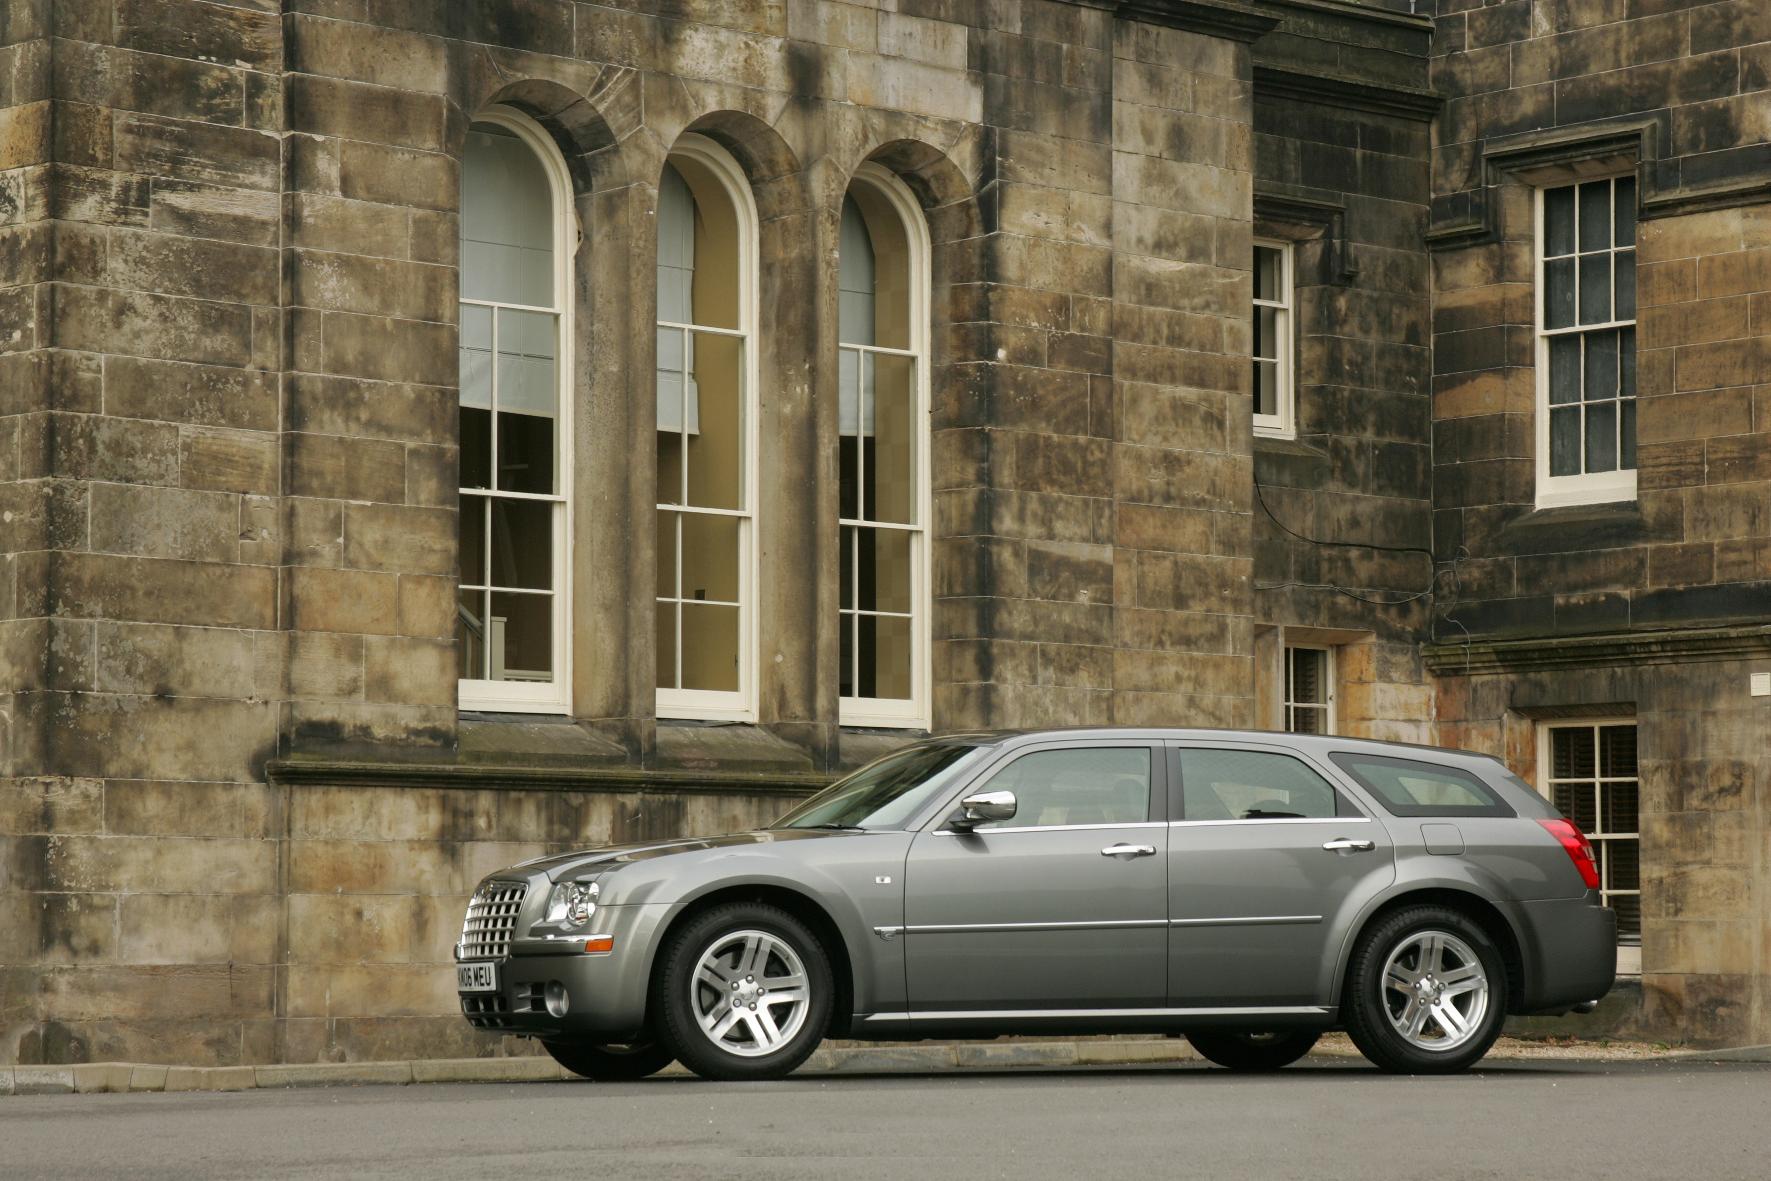 Chrysler, Chrysler 300C, 300C, American Car, classic car, retro car, motoring, automotive, V8, V6, CRD, adrian flux, not2grand, not2grand.co.uk, saloon car, 300C buying guide, motoring, automotive, featured